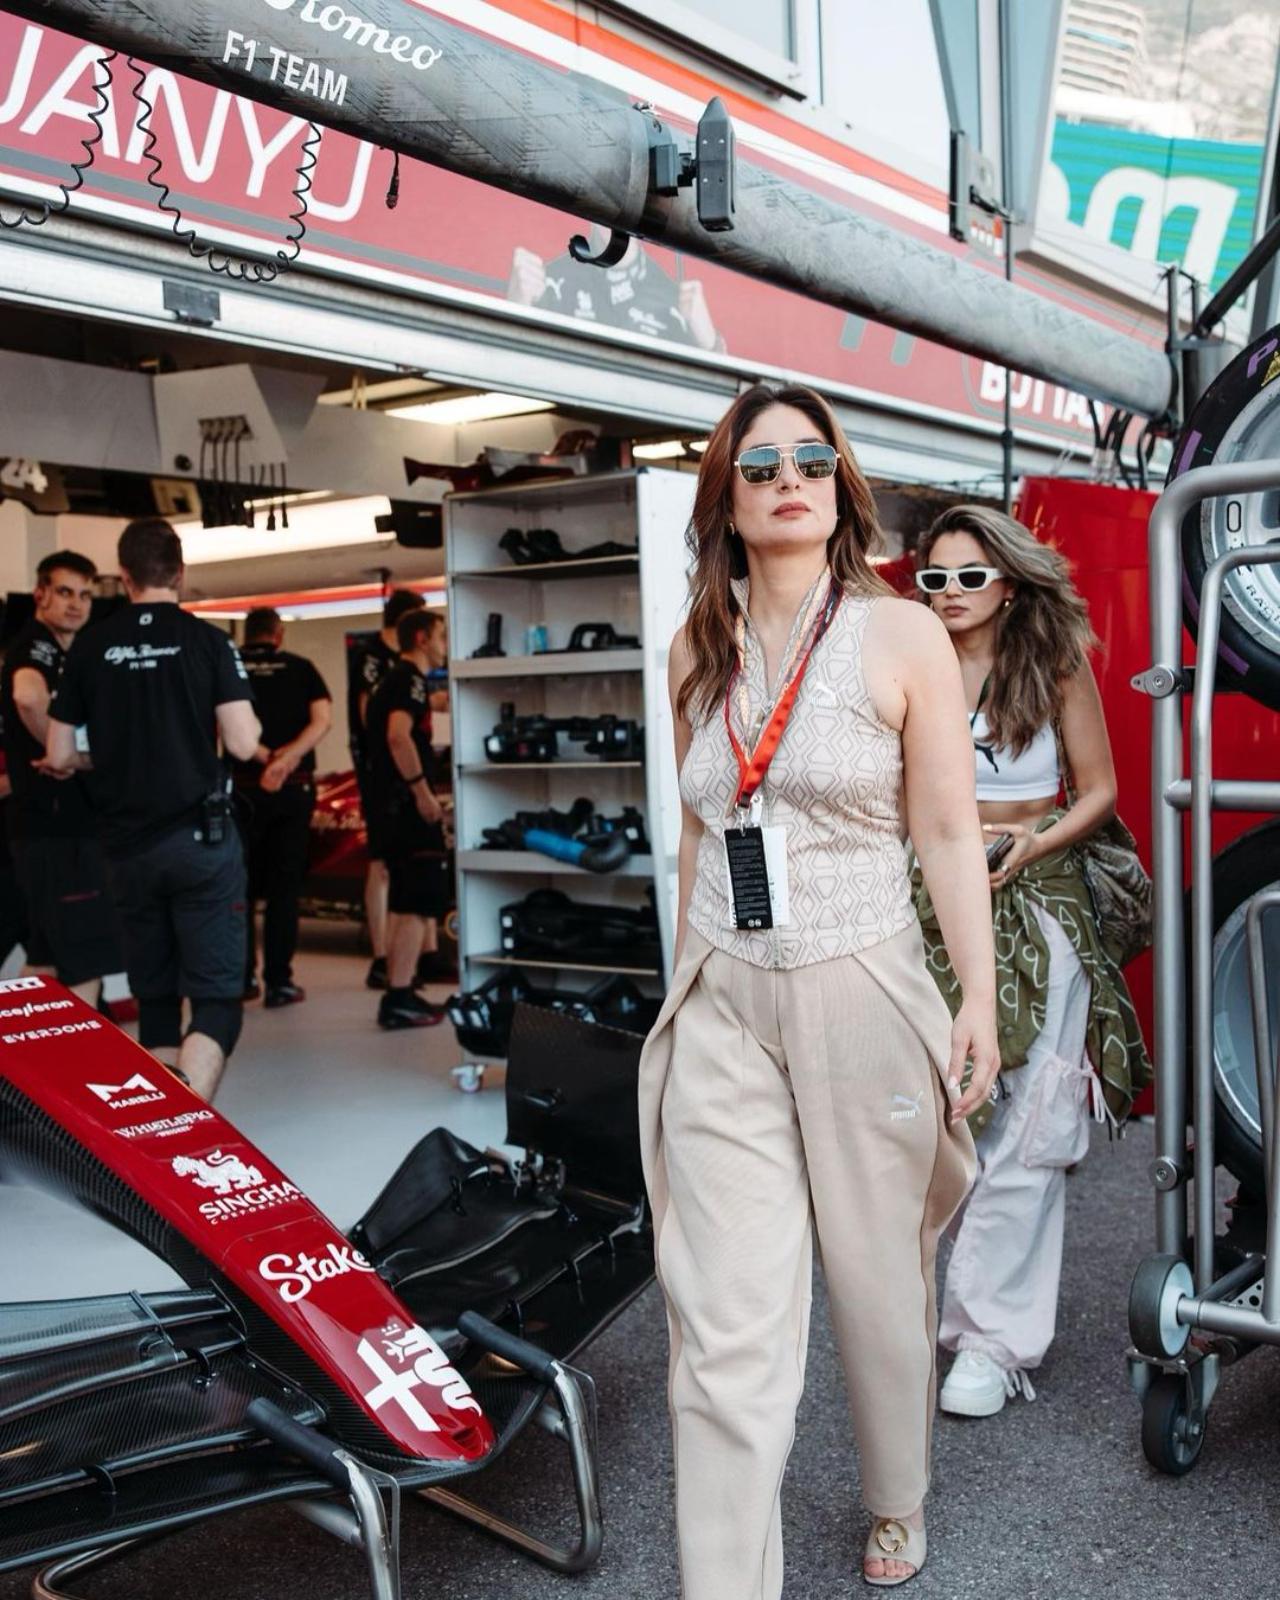 Kareena Kapoor Khan never fails to make heads turn every time she steps out. The actress who is currently in Monaco for Formula 1 Grand Prix made a stunning debut at the sporting event